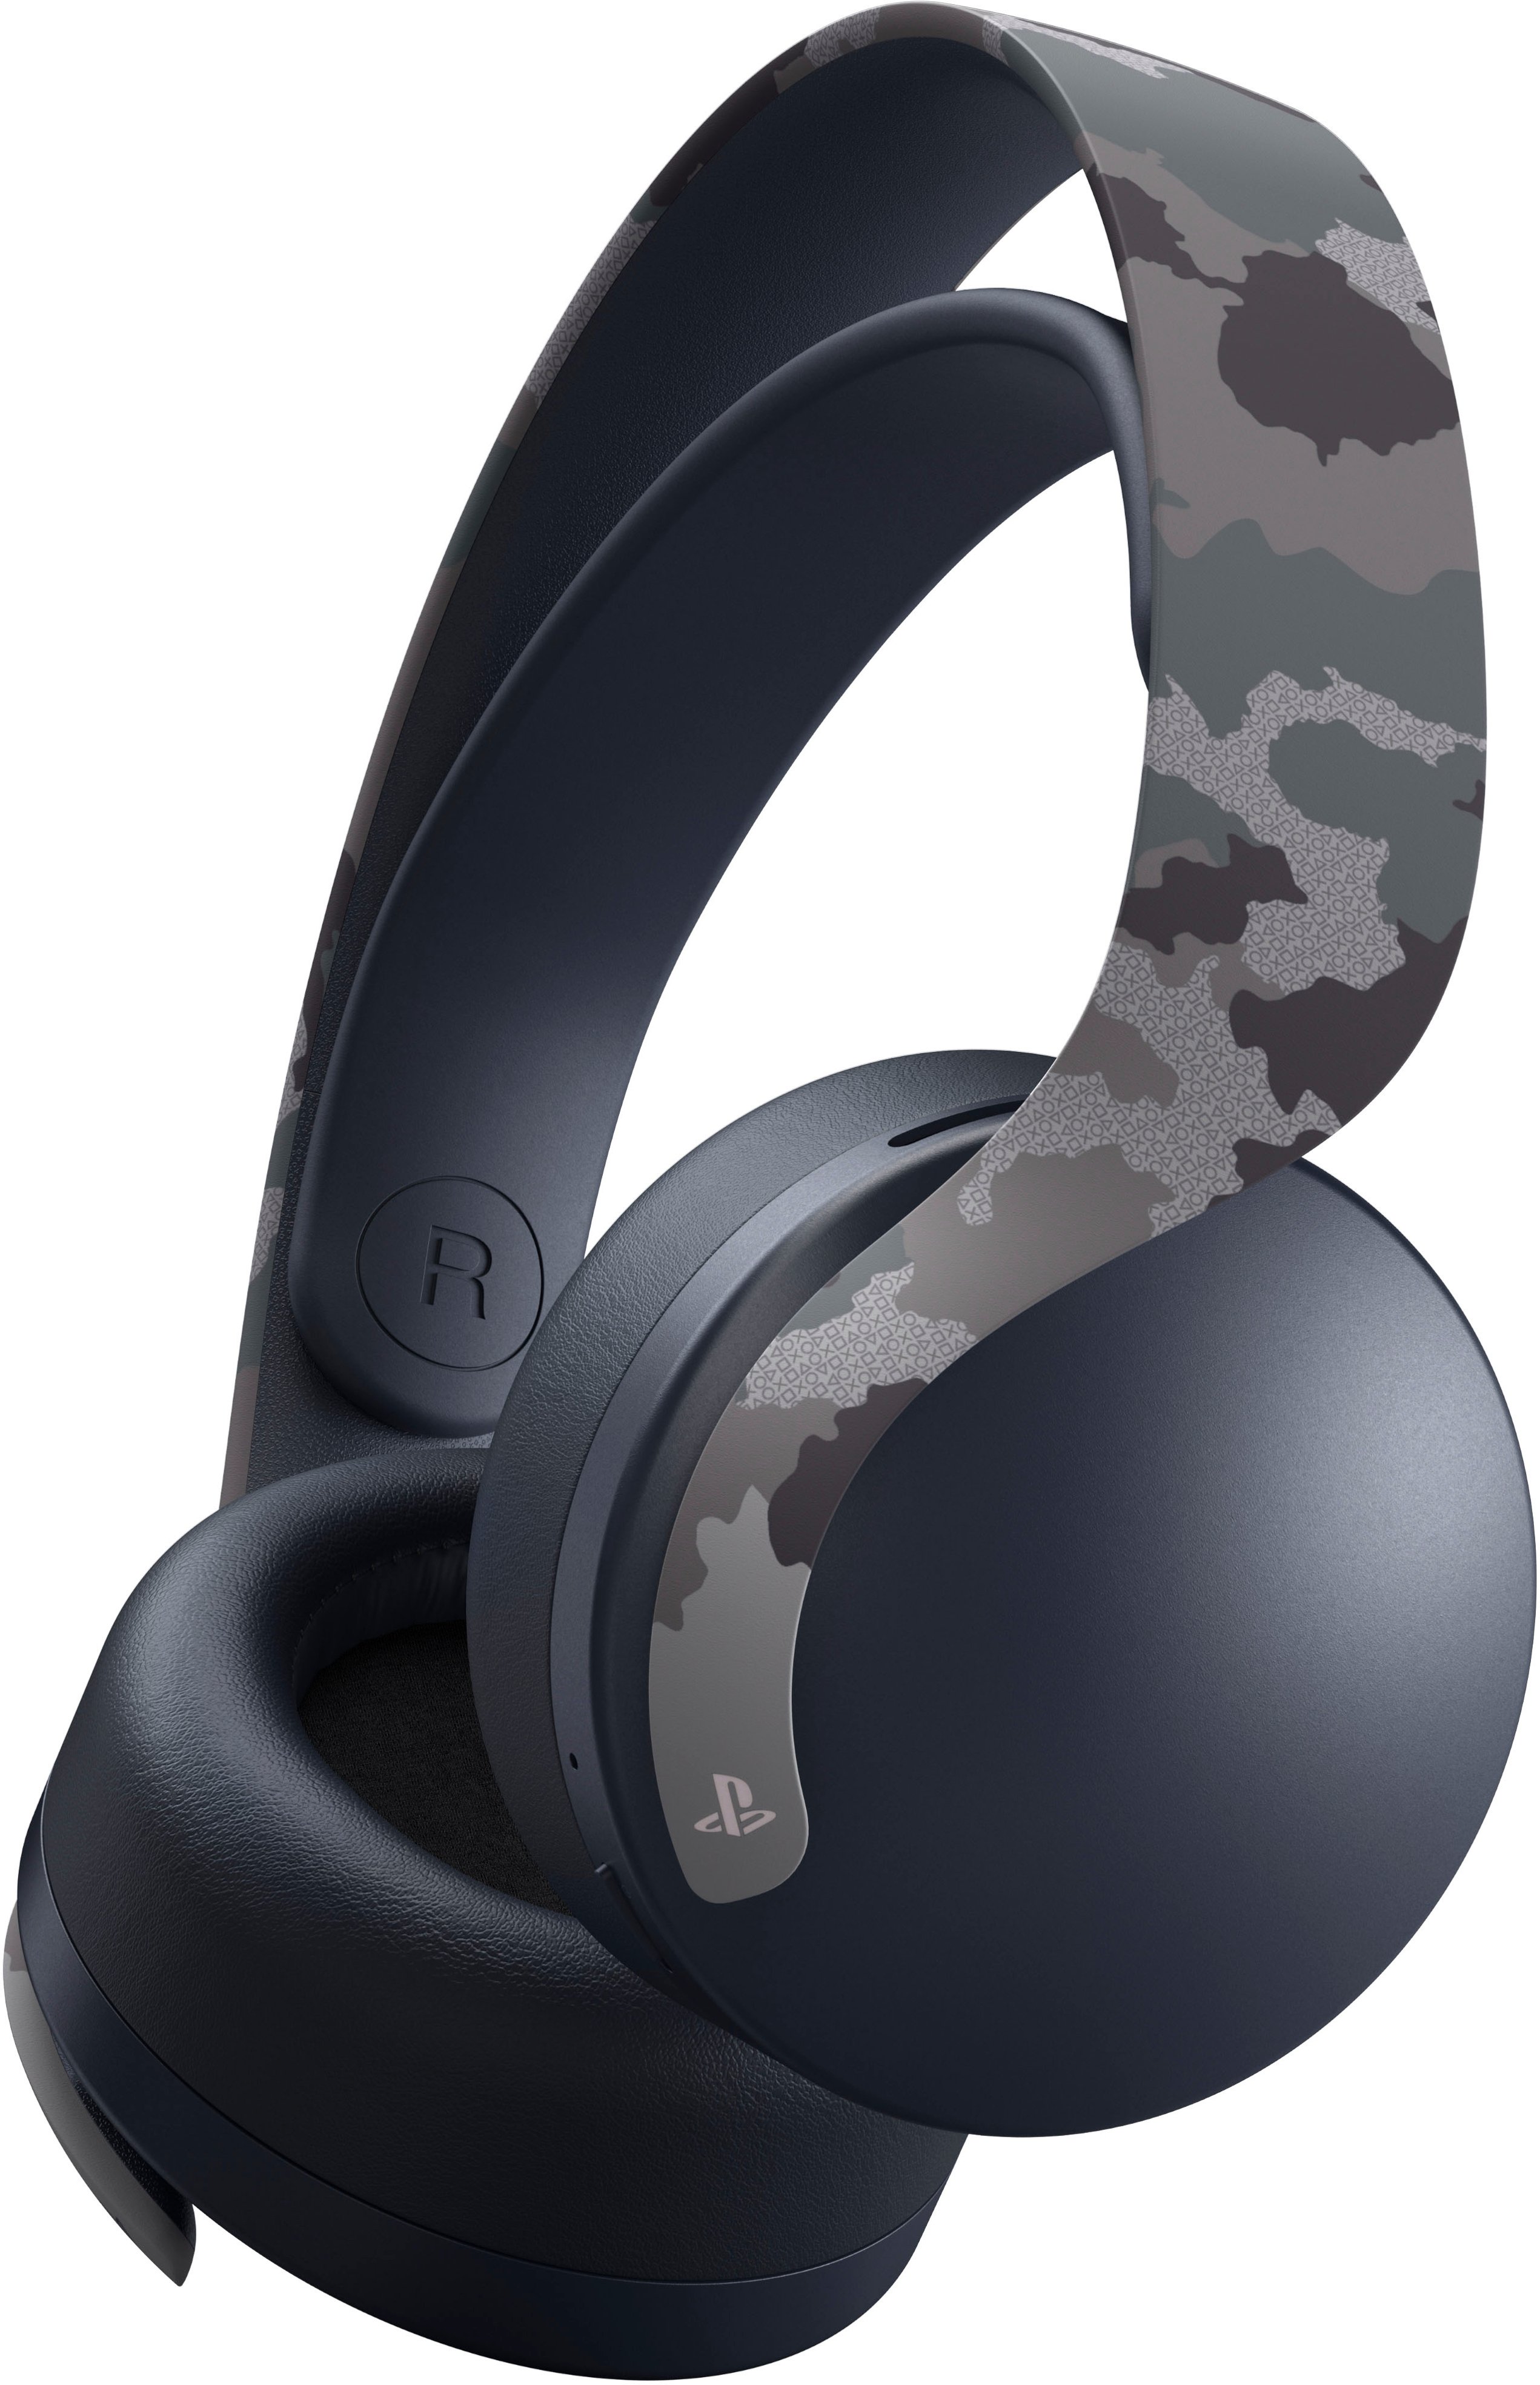 Sony PULSE 3D Wireless Headset PS5, PS4, and PC Gray Camouflage 1000030605 - Best Buy